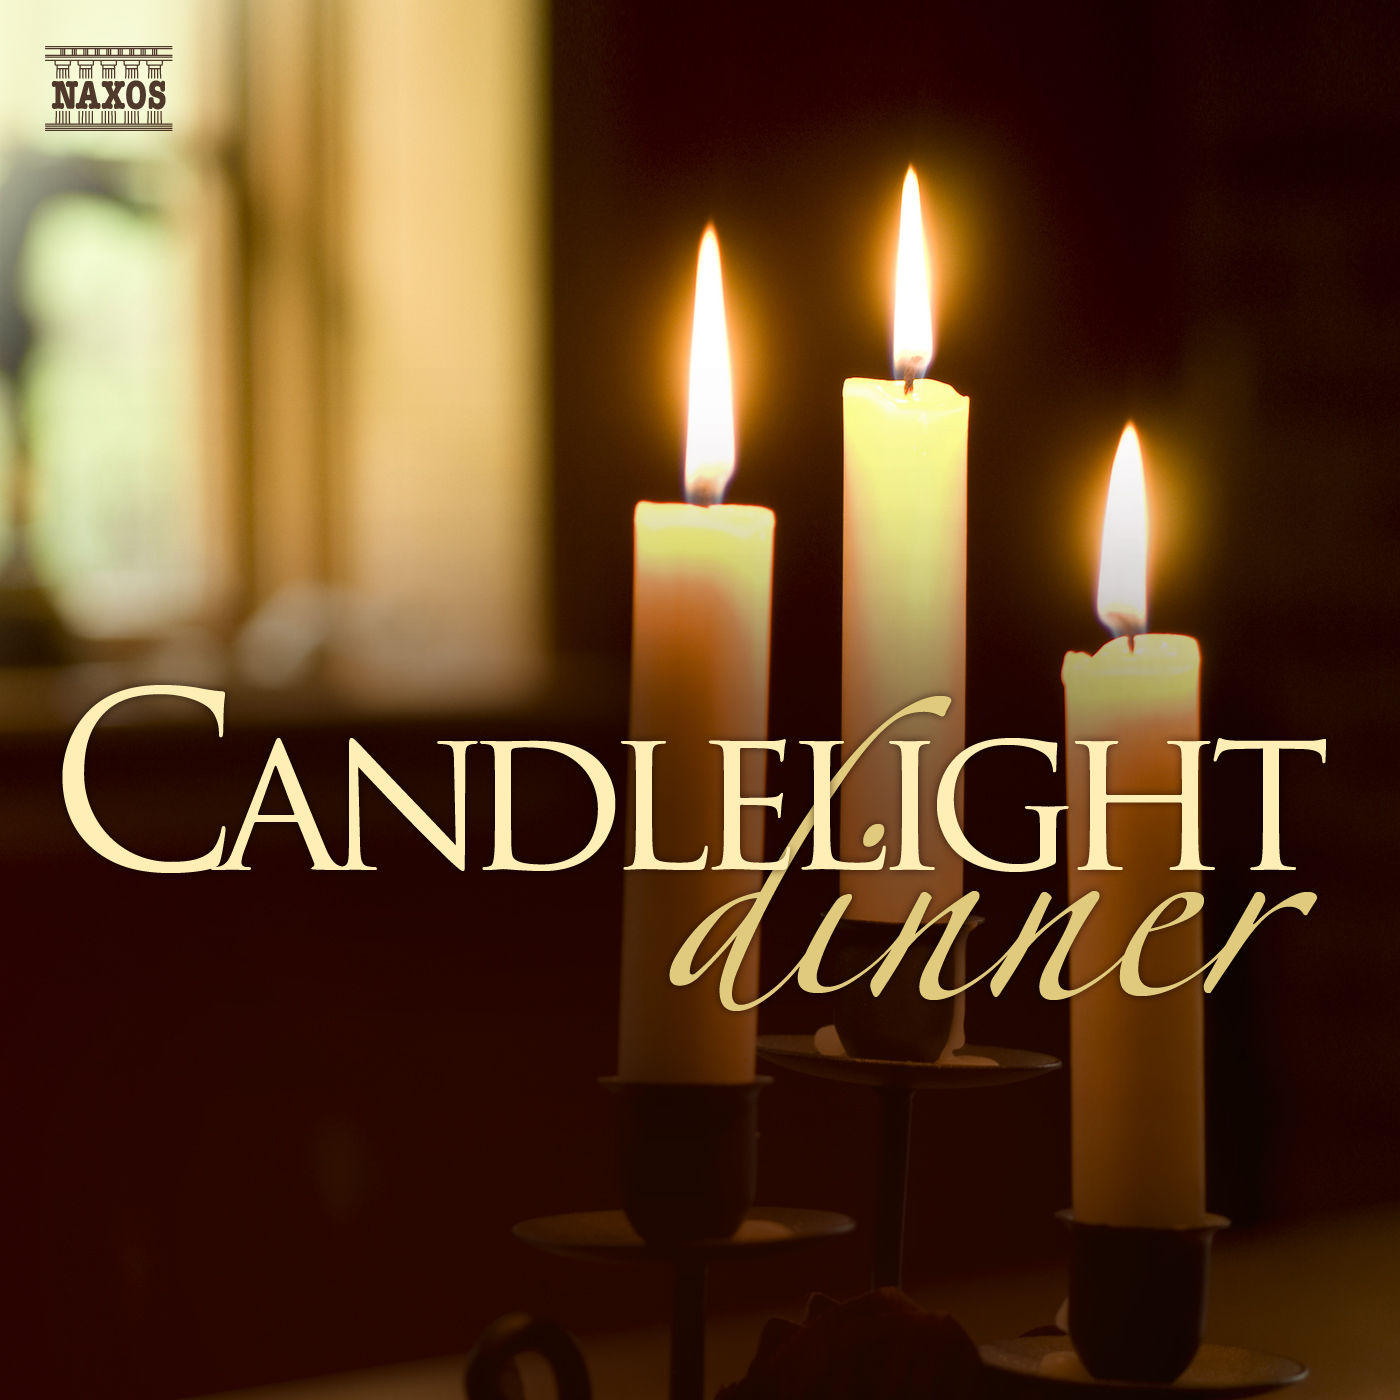 Pin Candlelight Dinner Clipart On Pinterest